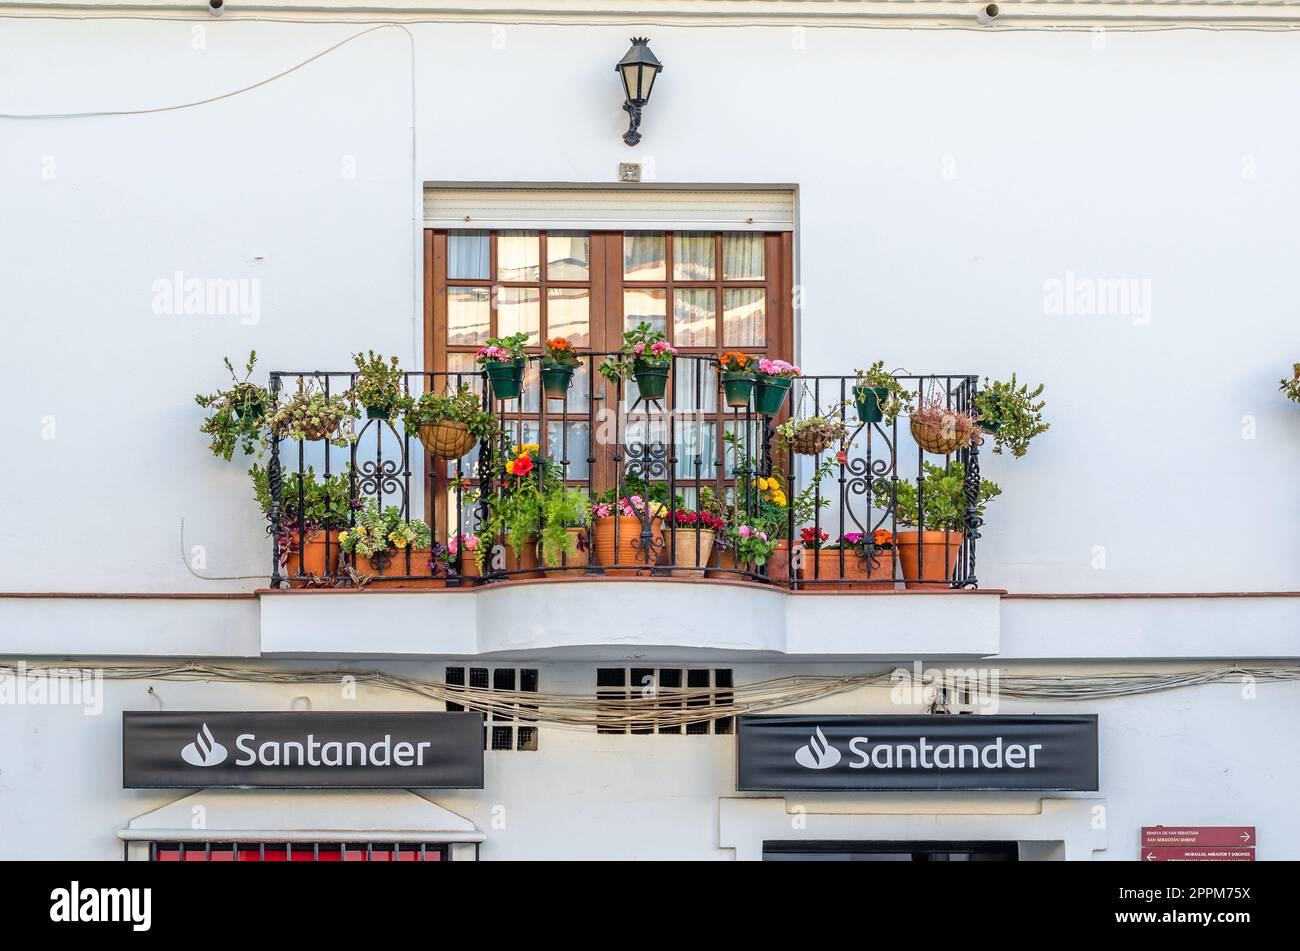 MIJAS, SPAIN - OCTOBER 9, 2021: Santander bank branch office in the village of Mijas, located on the Costa del Sol, Andalusia, southern Spain. Santander is a Spanish bank founded in 1857 Stock Photo